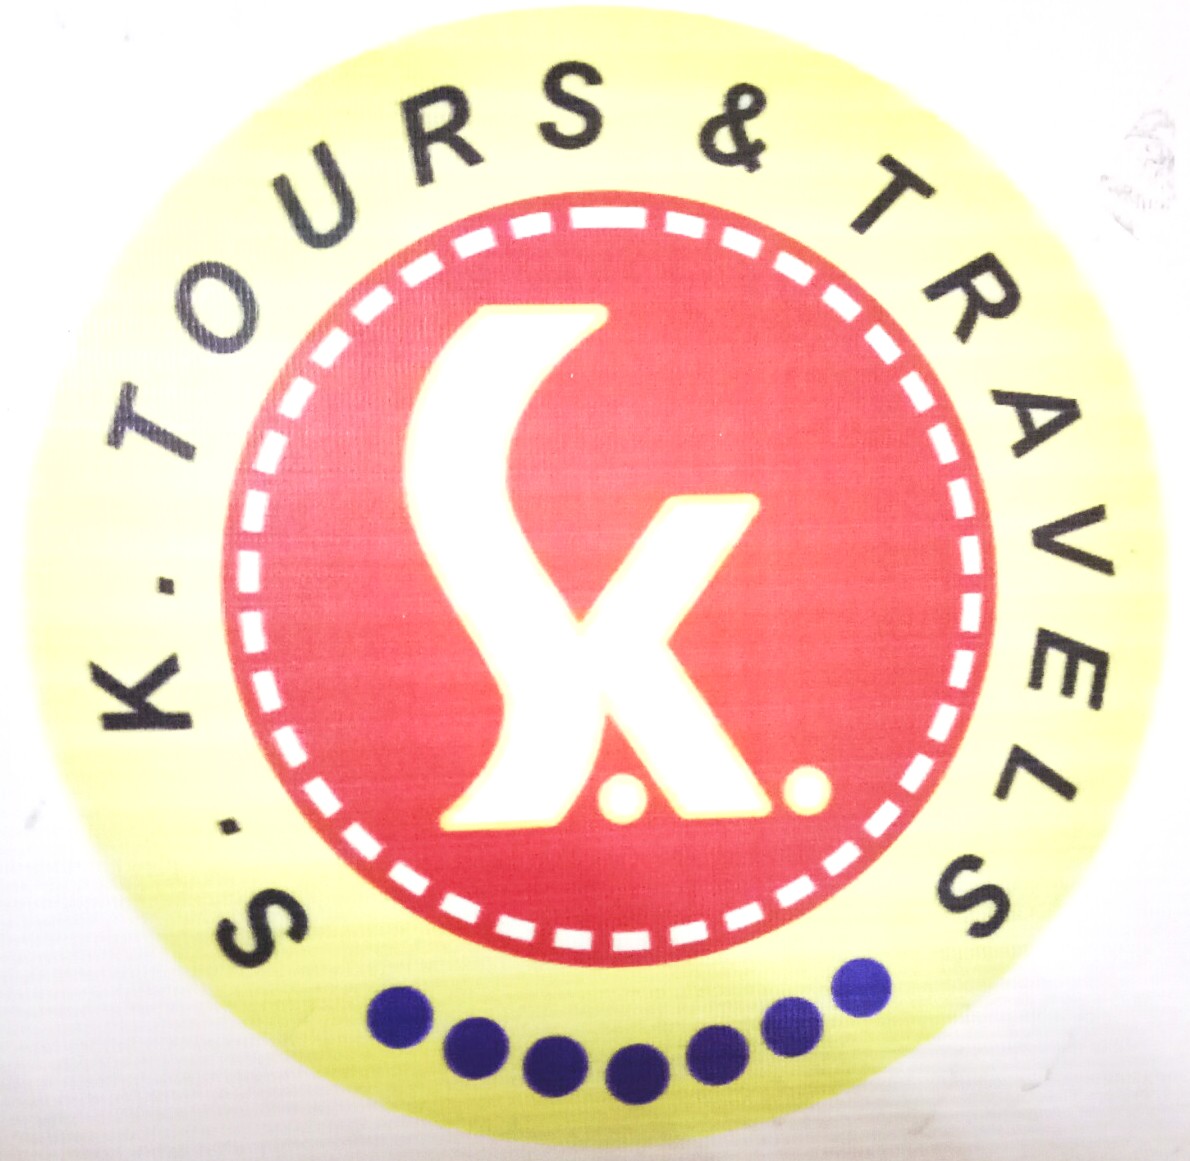 sk tours and travels logo